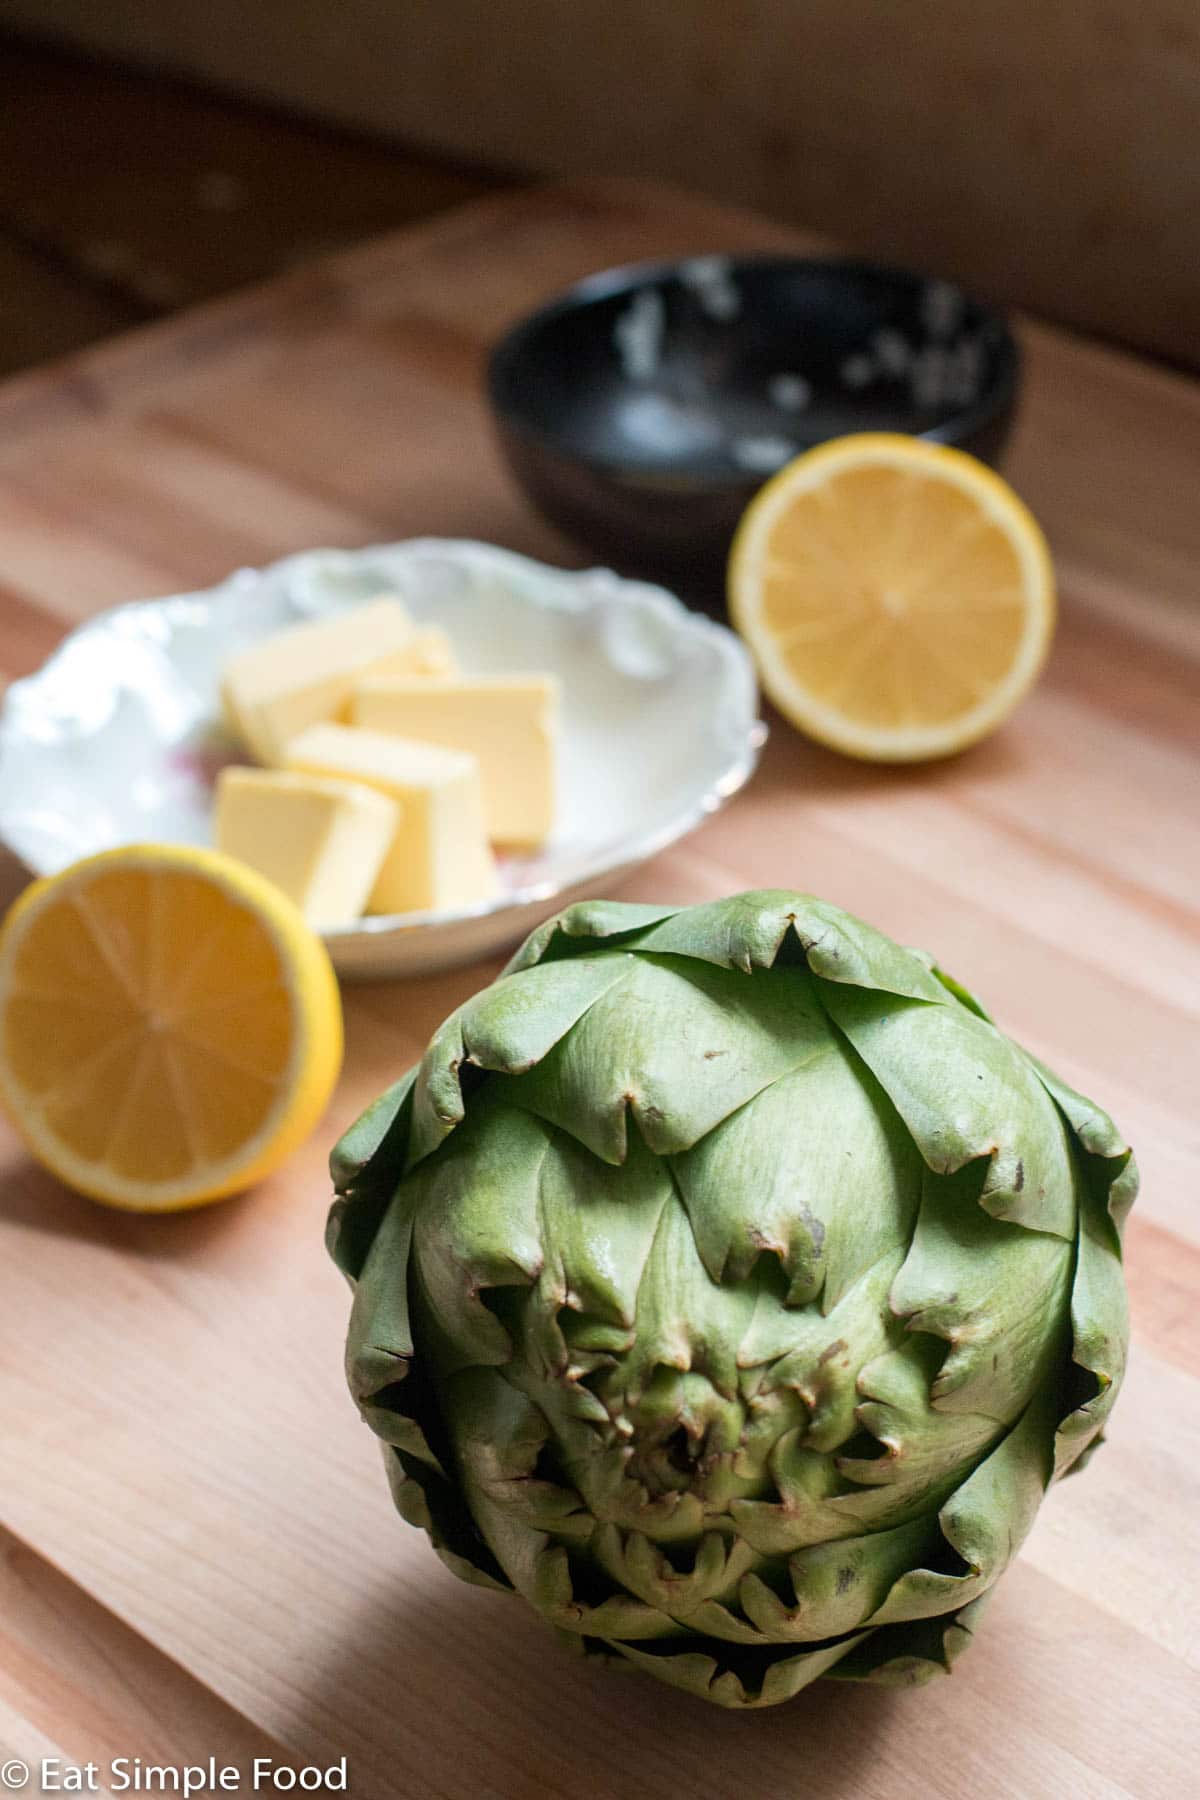 Raw artichoke on wood cutting board. 2 lemon halves and tabs of butter in a small white shallow bowl in the background.